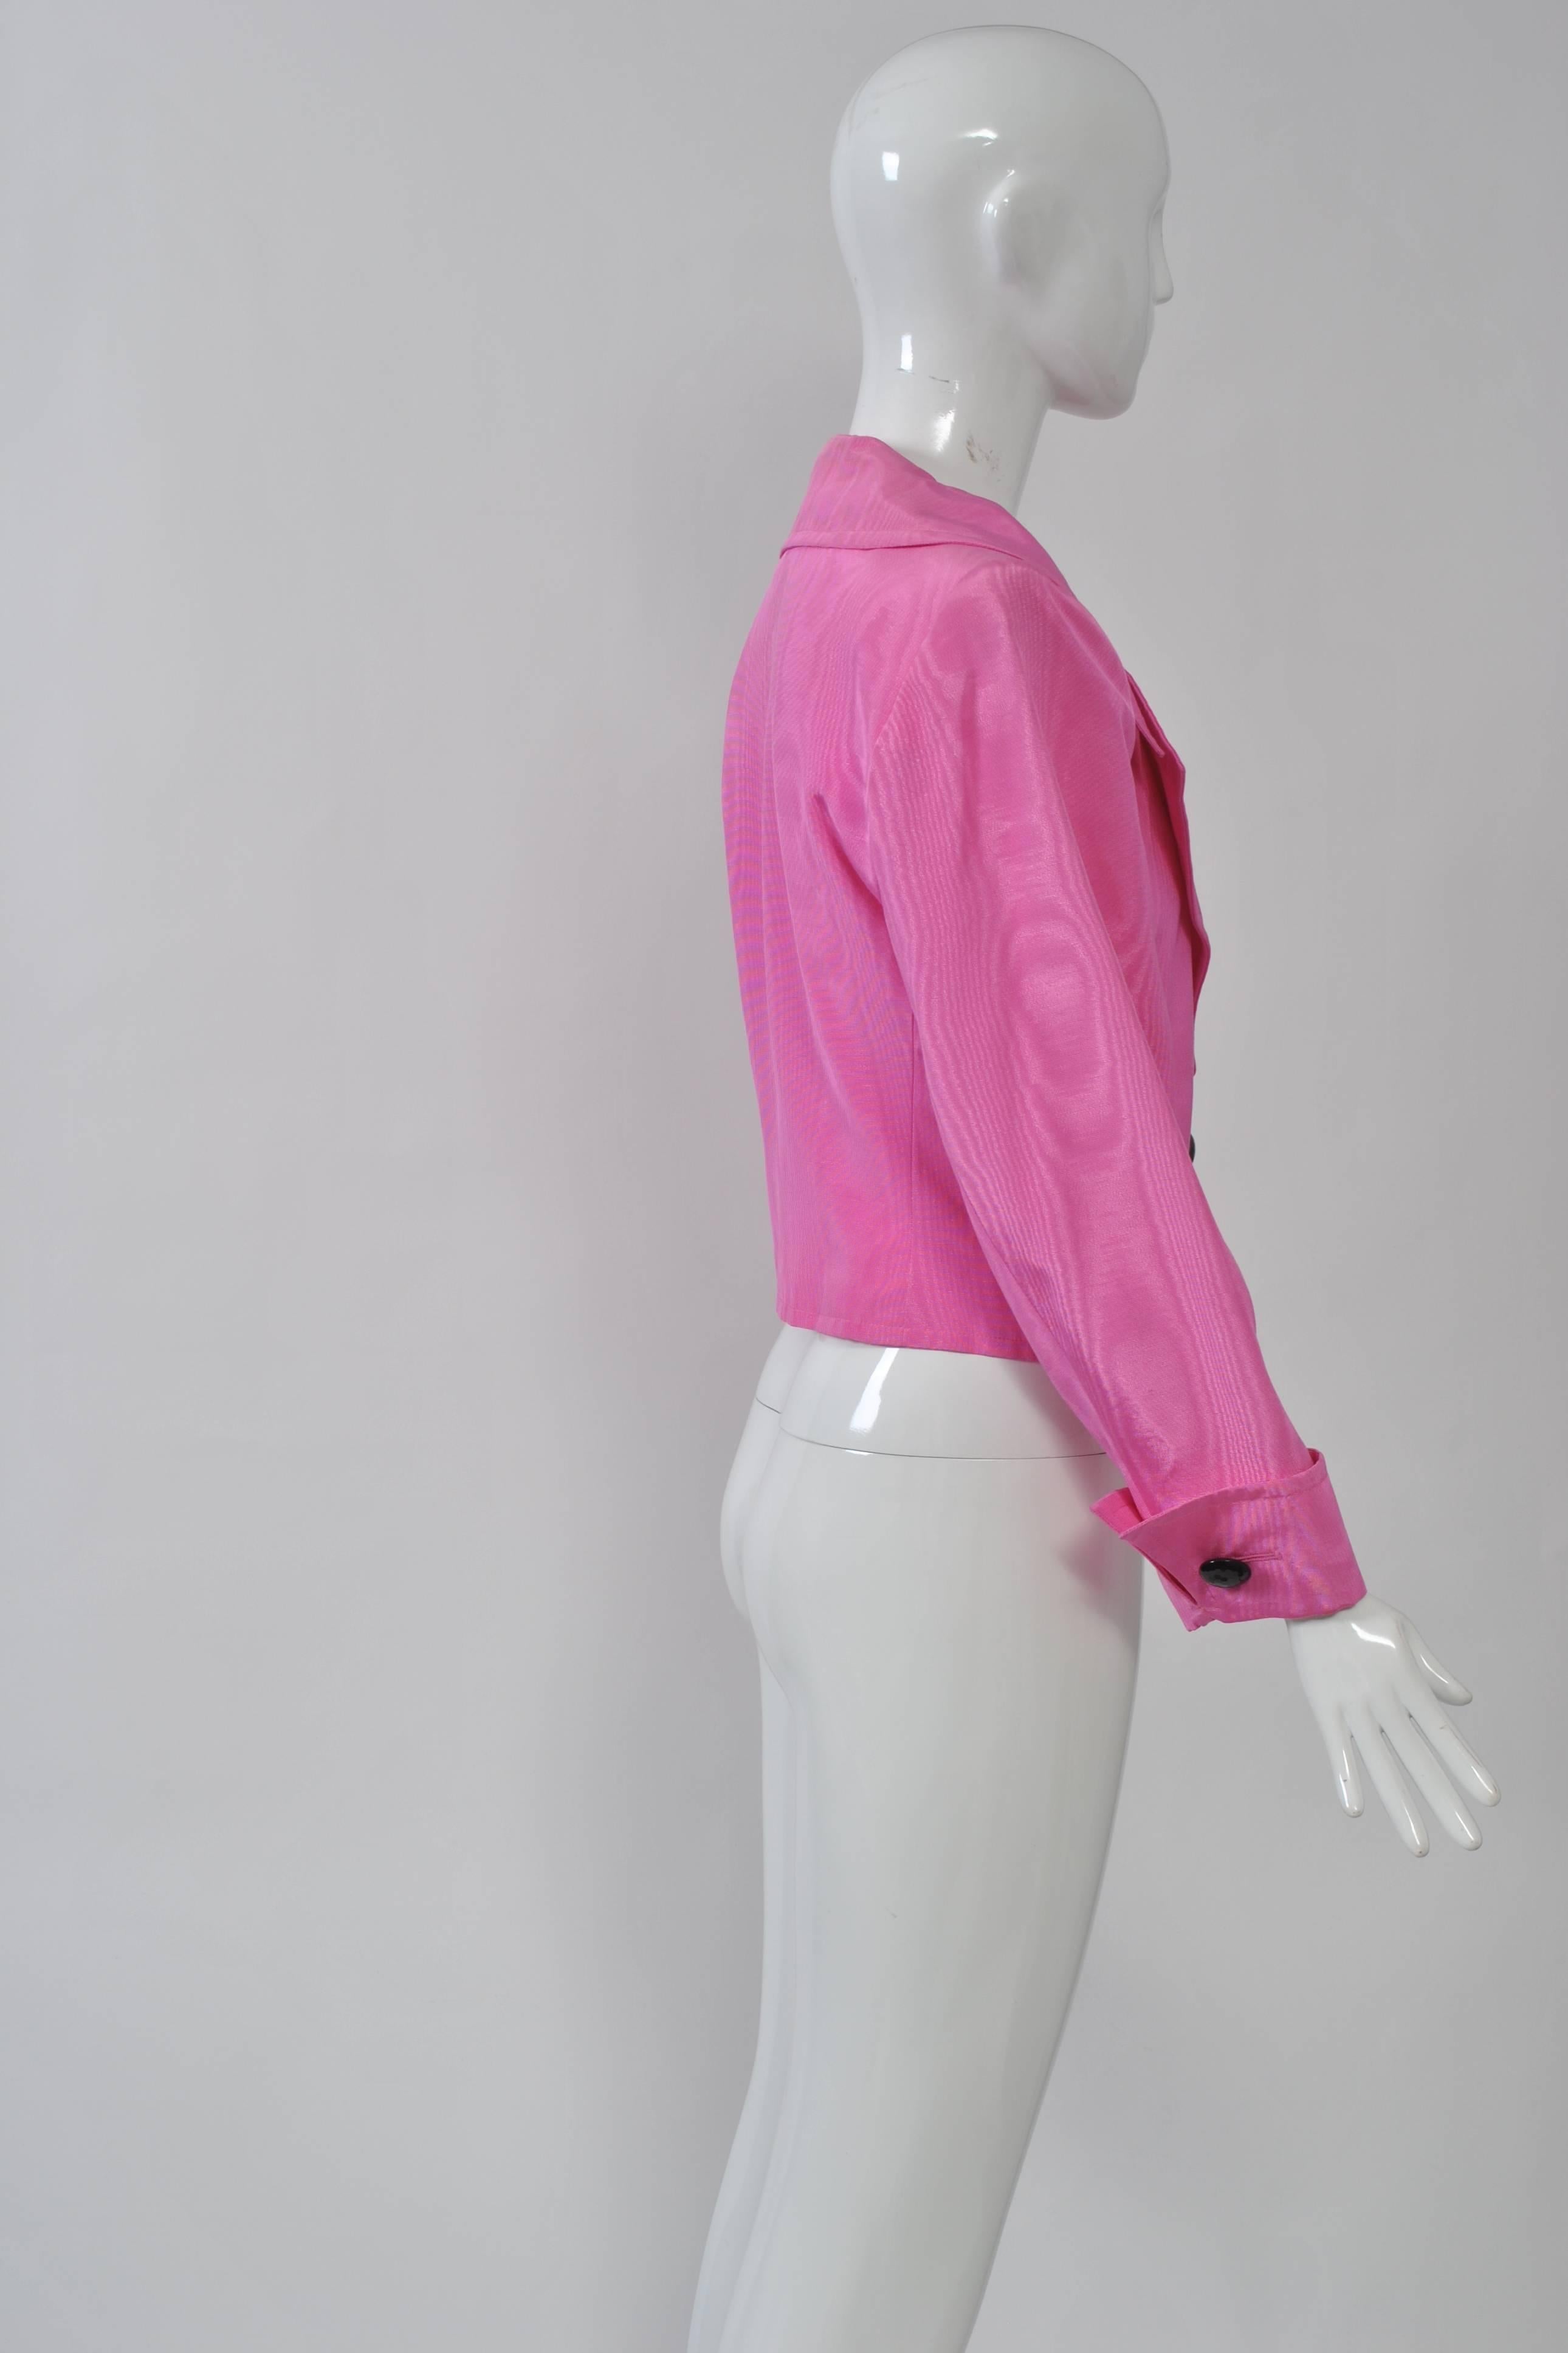 Saint Laurent Rive Gauche short jacket in bright pink moire with a large collar and shaped waist. The turned-back cuffs and single button closure are fastened with large black buttons. Shoulder pads.